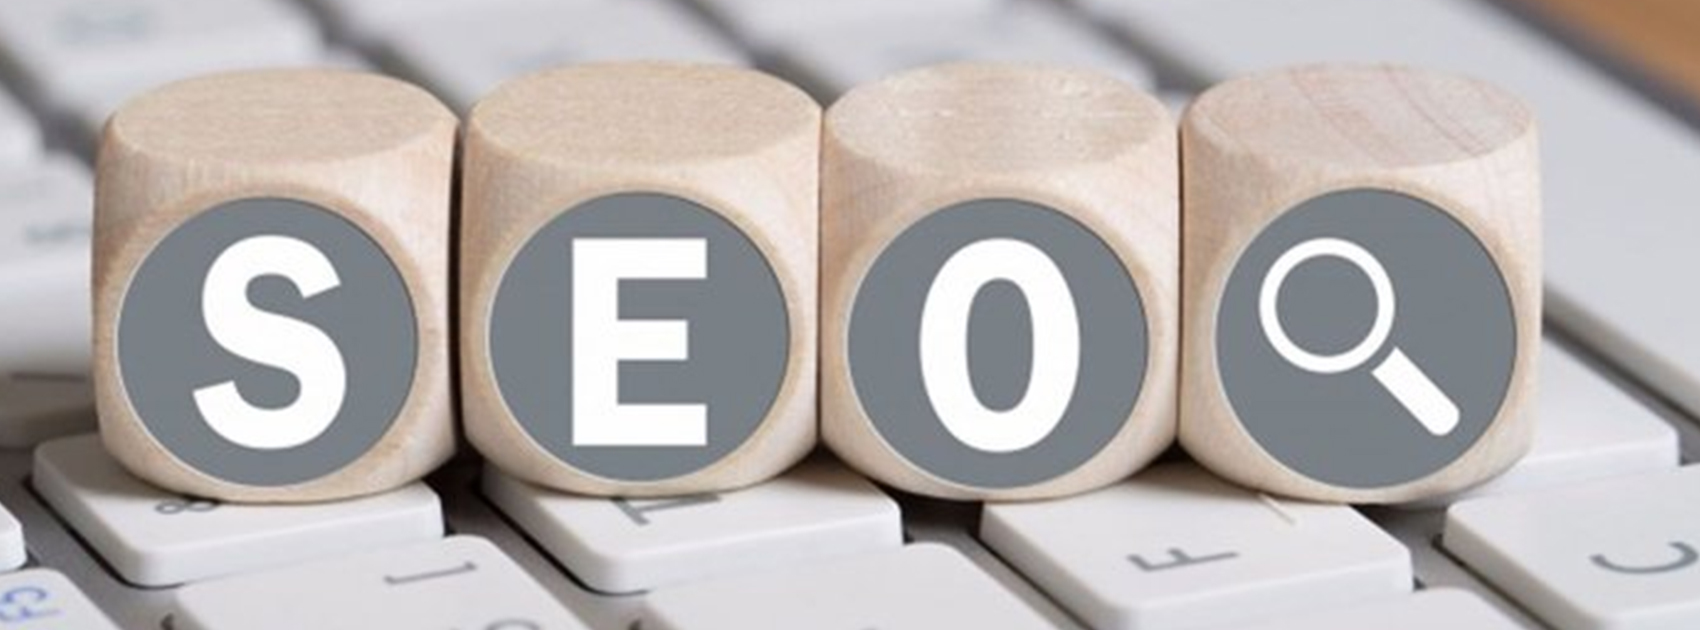 How to Improve SEO of your Website,Startup Stories,Improve SEO Ranking,SEO Tips for Website,SEO Tips for Improve Website Ranking,Search Engine Optimisation,SEO Tips,SEO Tools,Website SEO Strategy,SEO Strategies to Improve Website Rank,SEO Strategy 2019,Website Optimization Tips,Tips to Website Performance Optimization